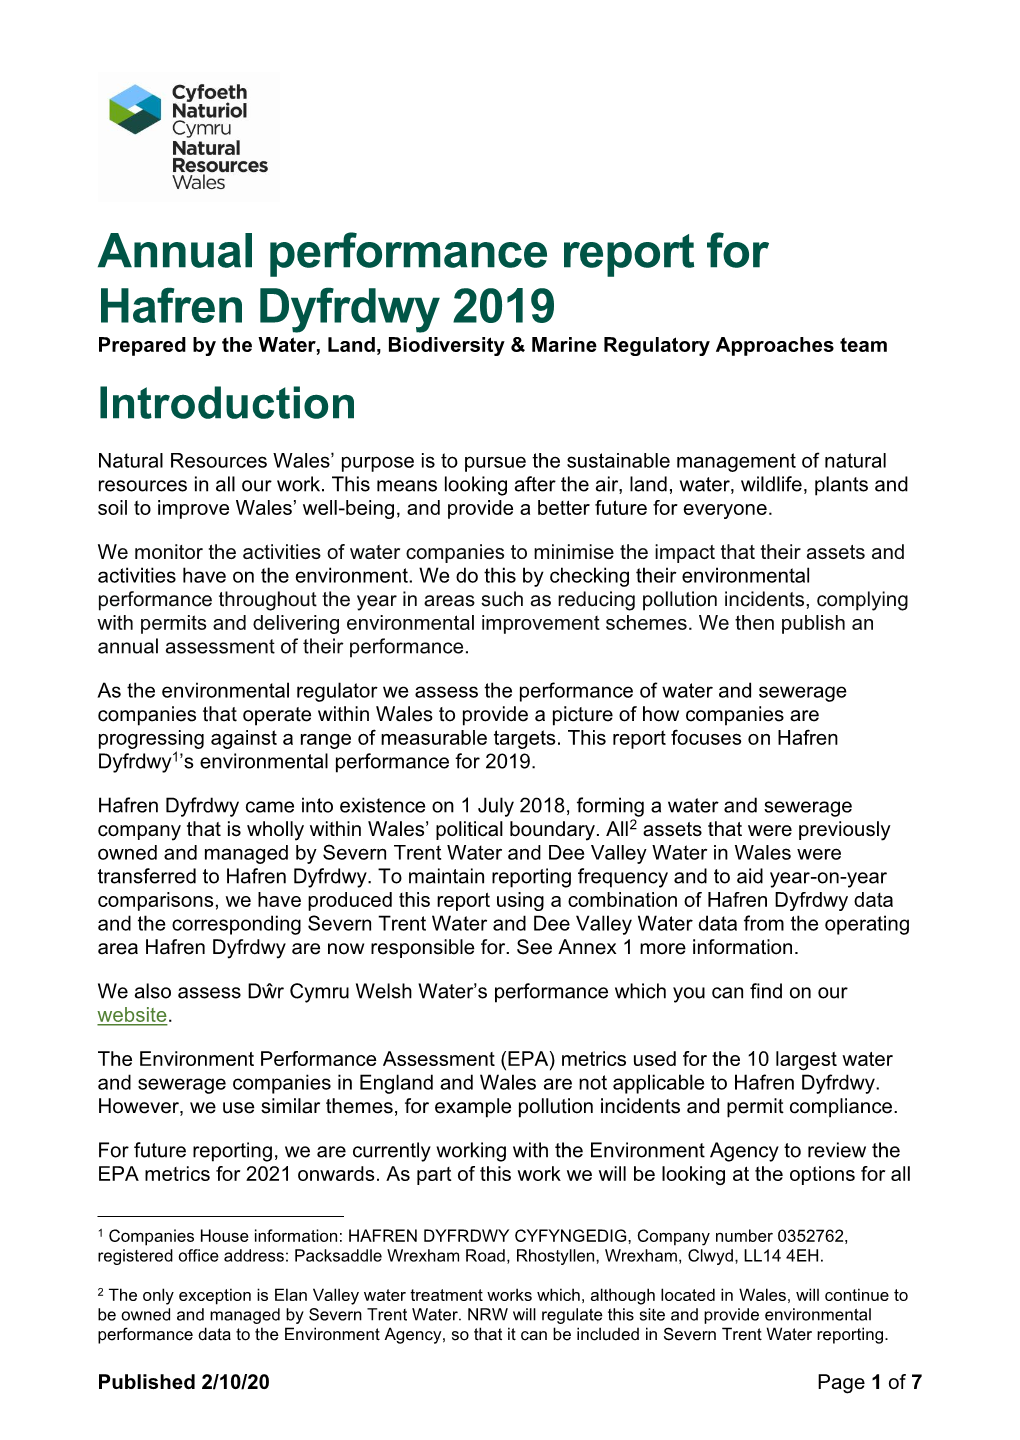 Annual Performance Report for Hafren Dyfrdwy 2019 Prepared by the Water, Land, Biodiversity & Marine Regulatory Approaches Team Introduction